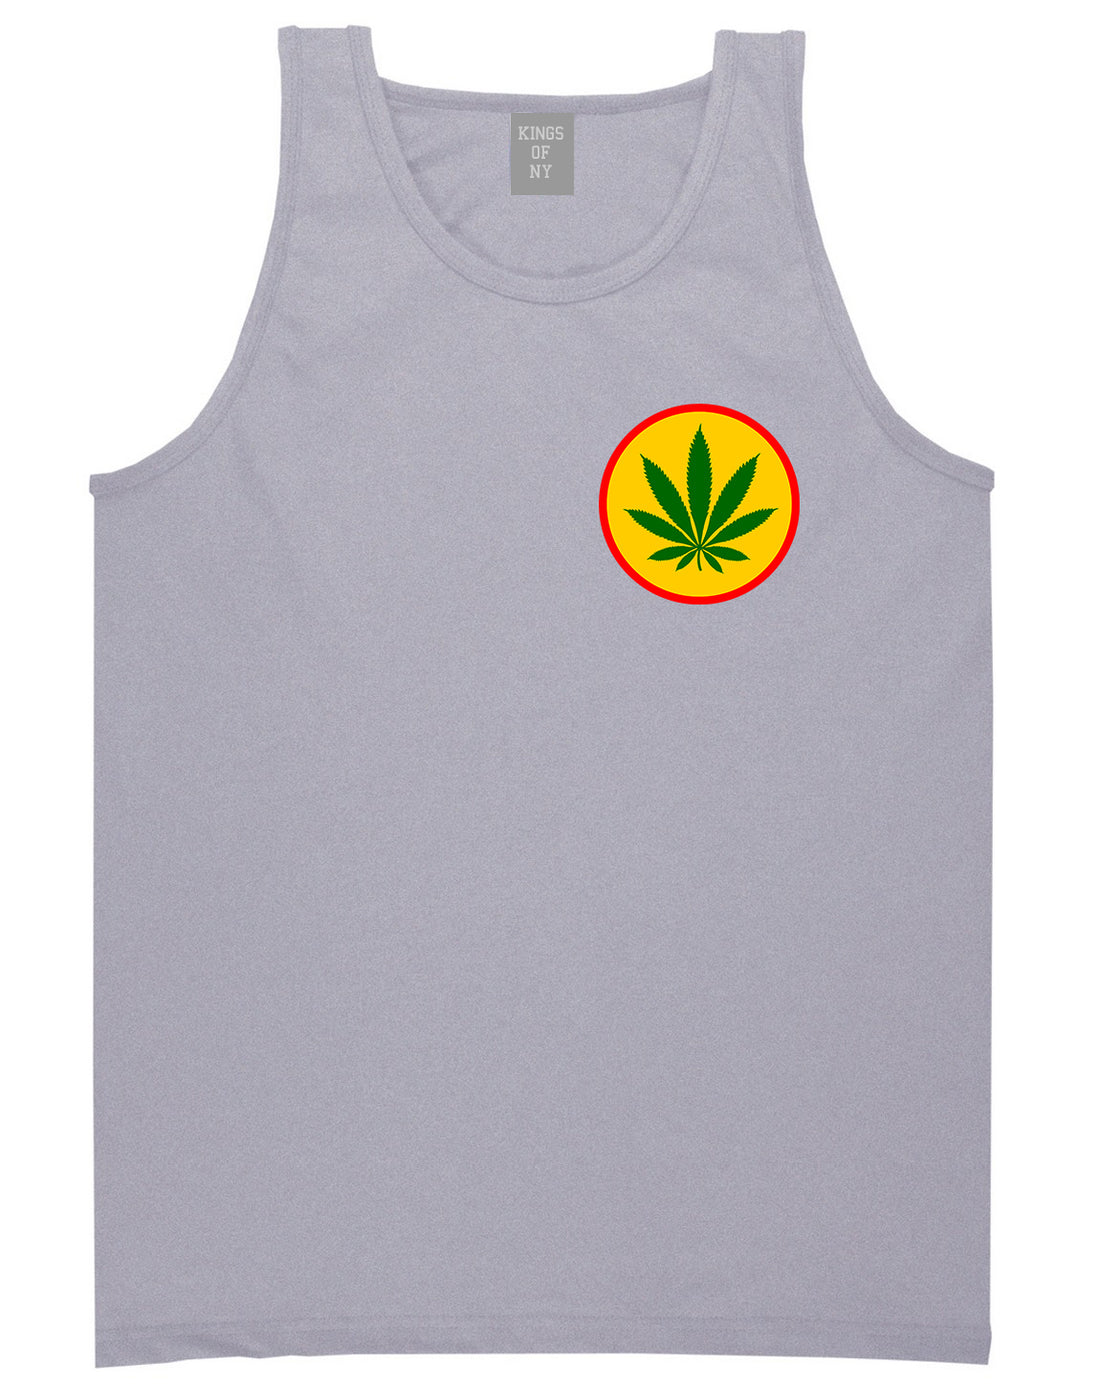 Ganja Green Weed Leaf Chest Mens Grey Tank Top Shirt by KINGS OF NY